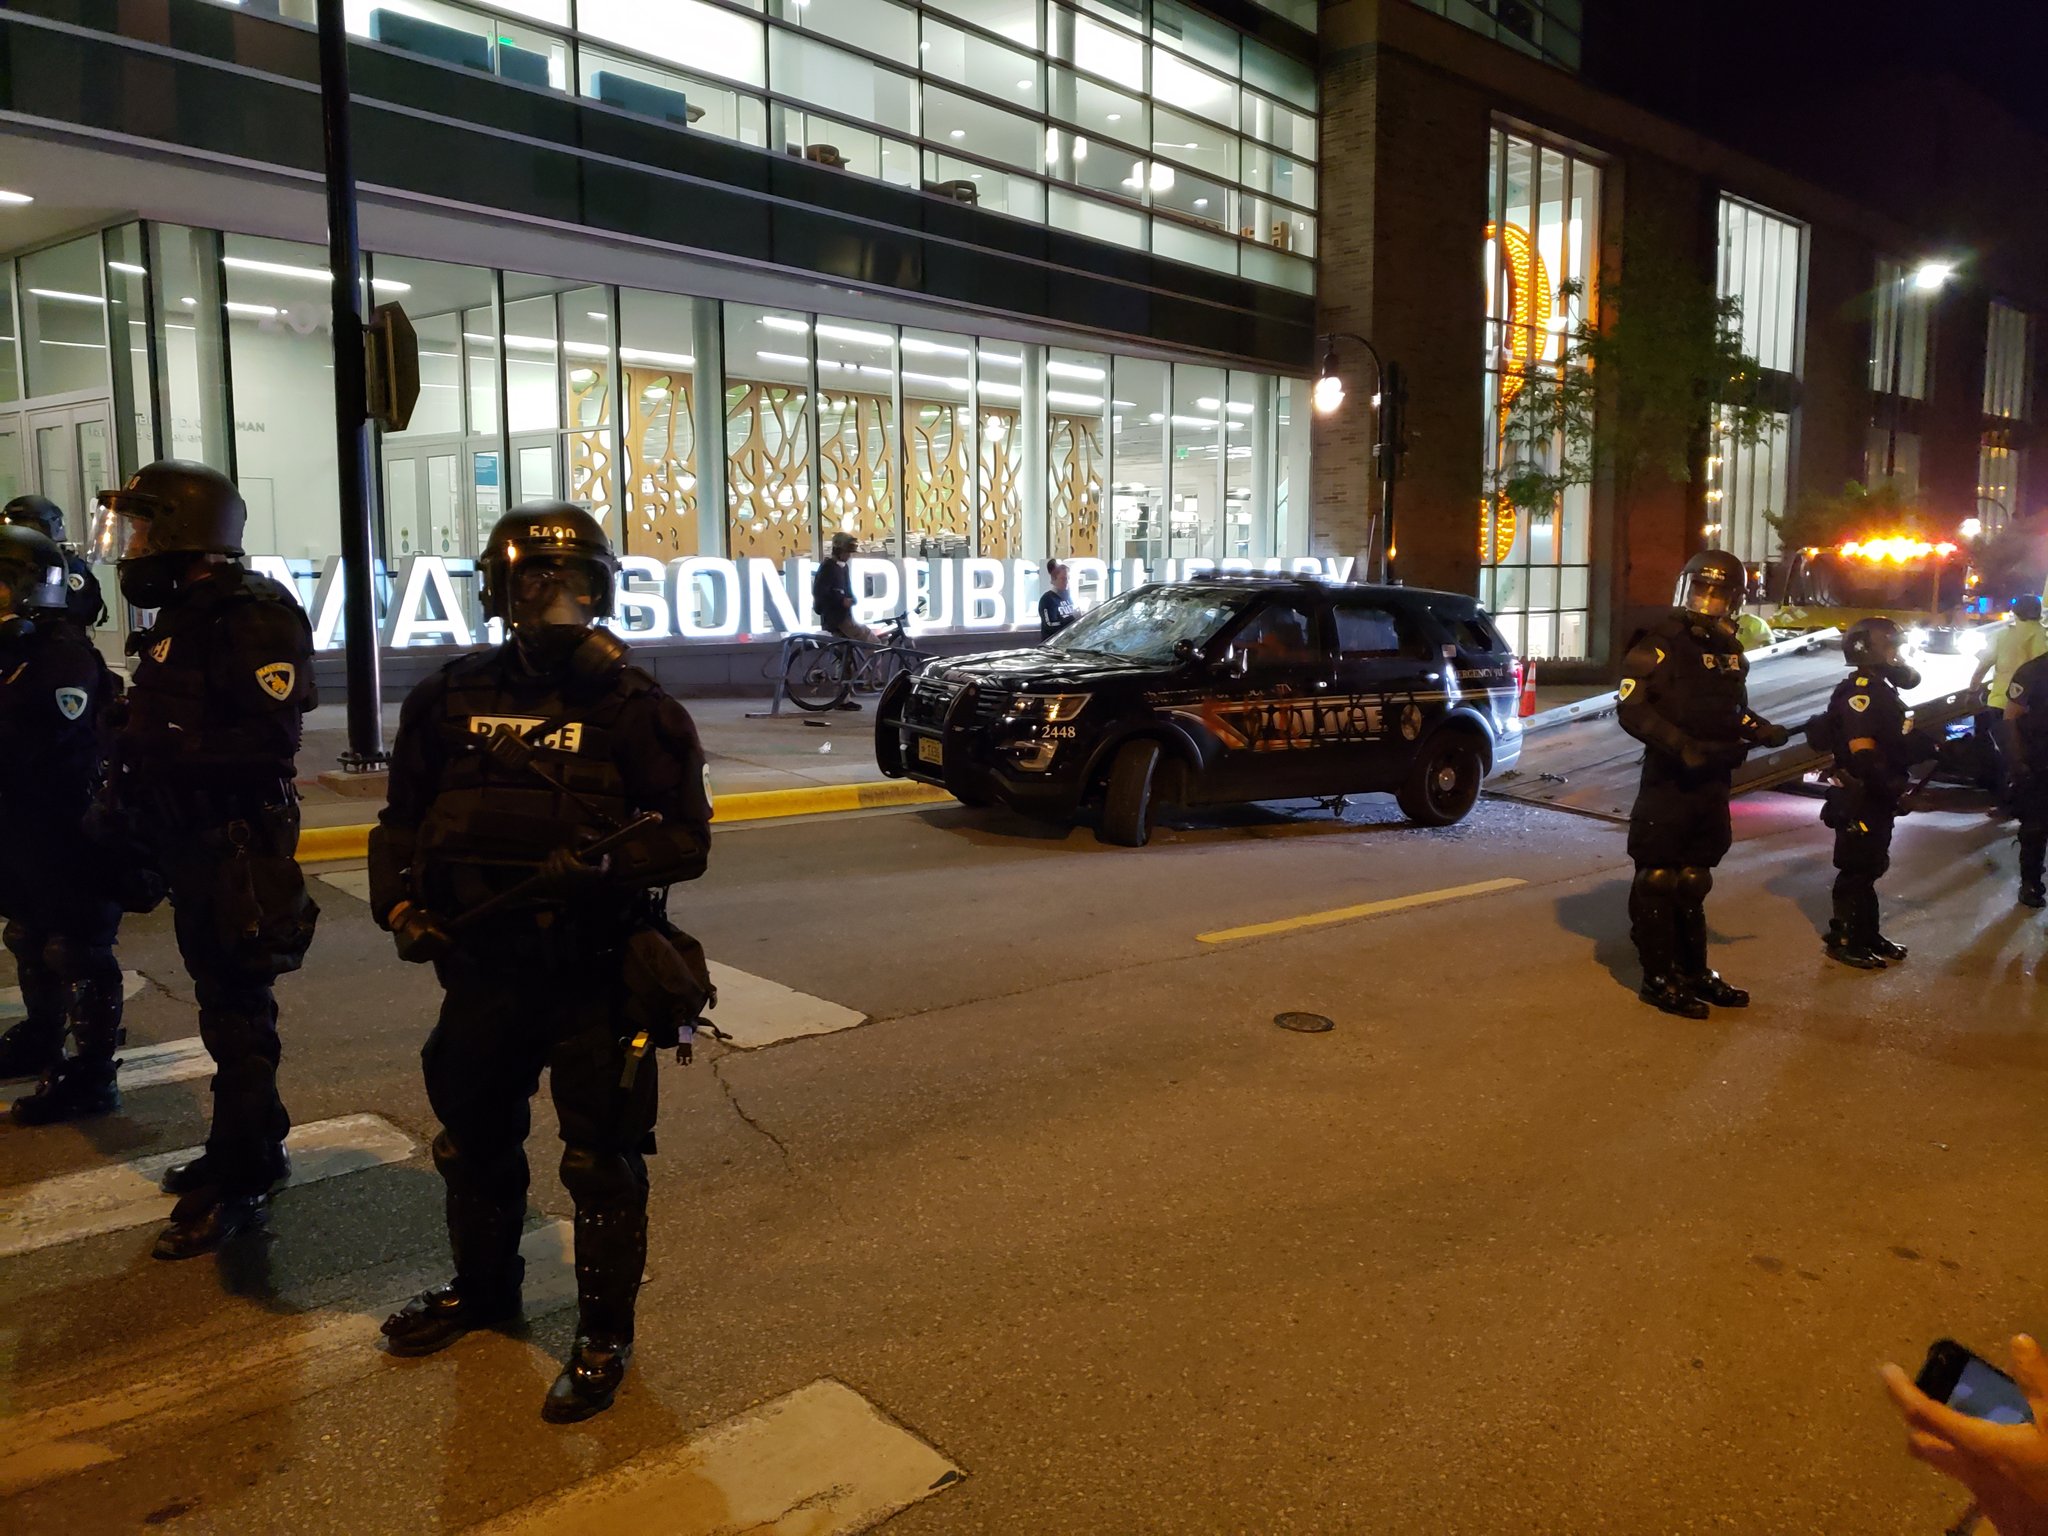 A police car was vandalized in downtown Madison Saturday night.